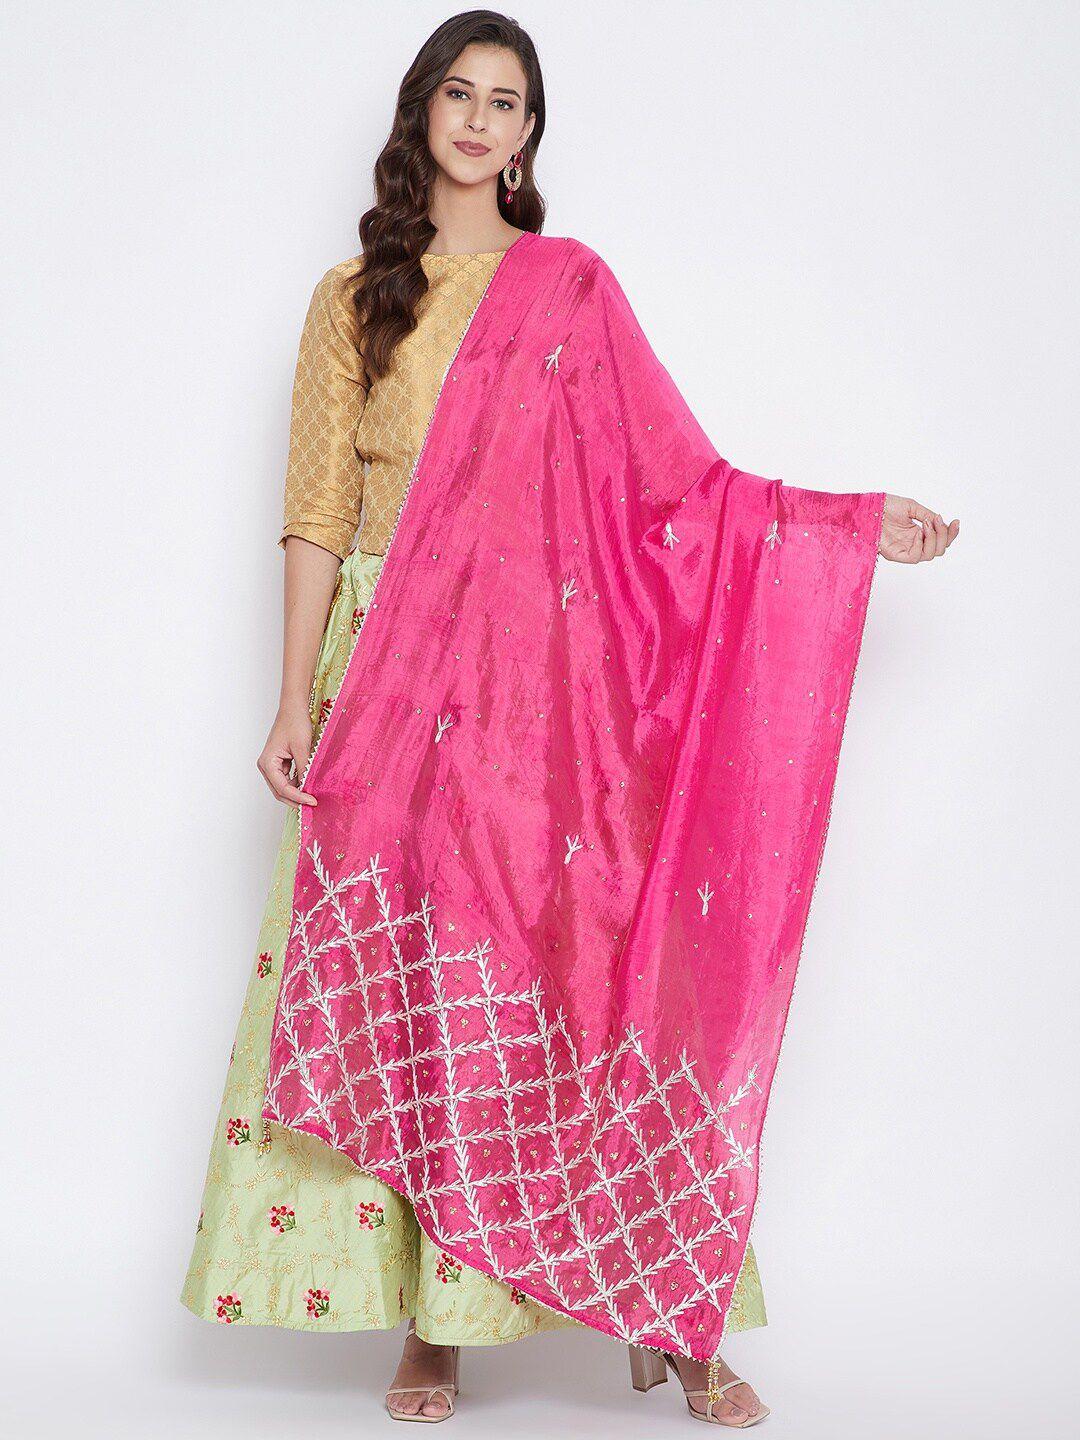 clora-creation-pink-&-silver-toned-embroidered-dupatta